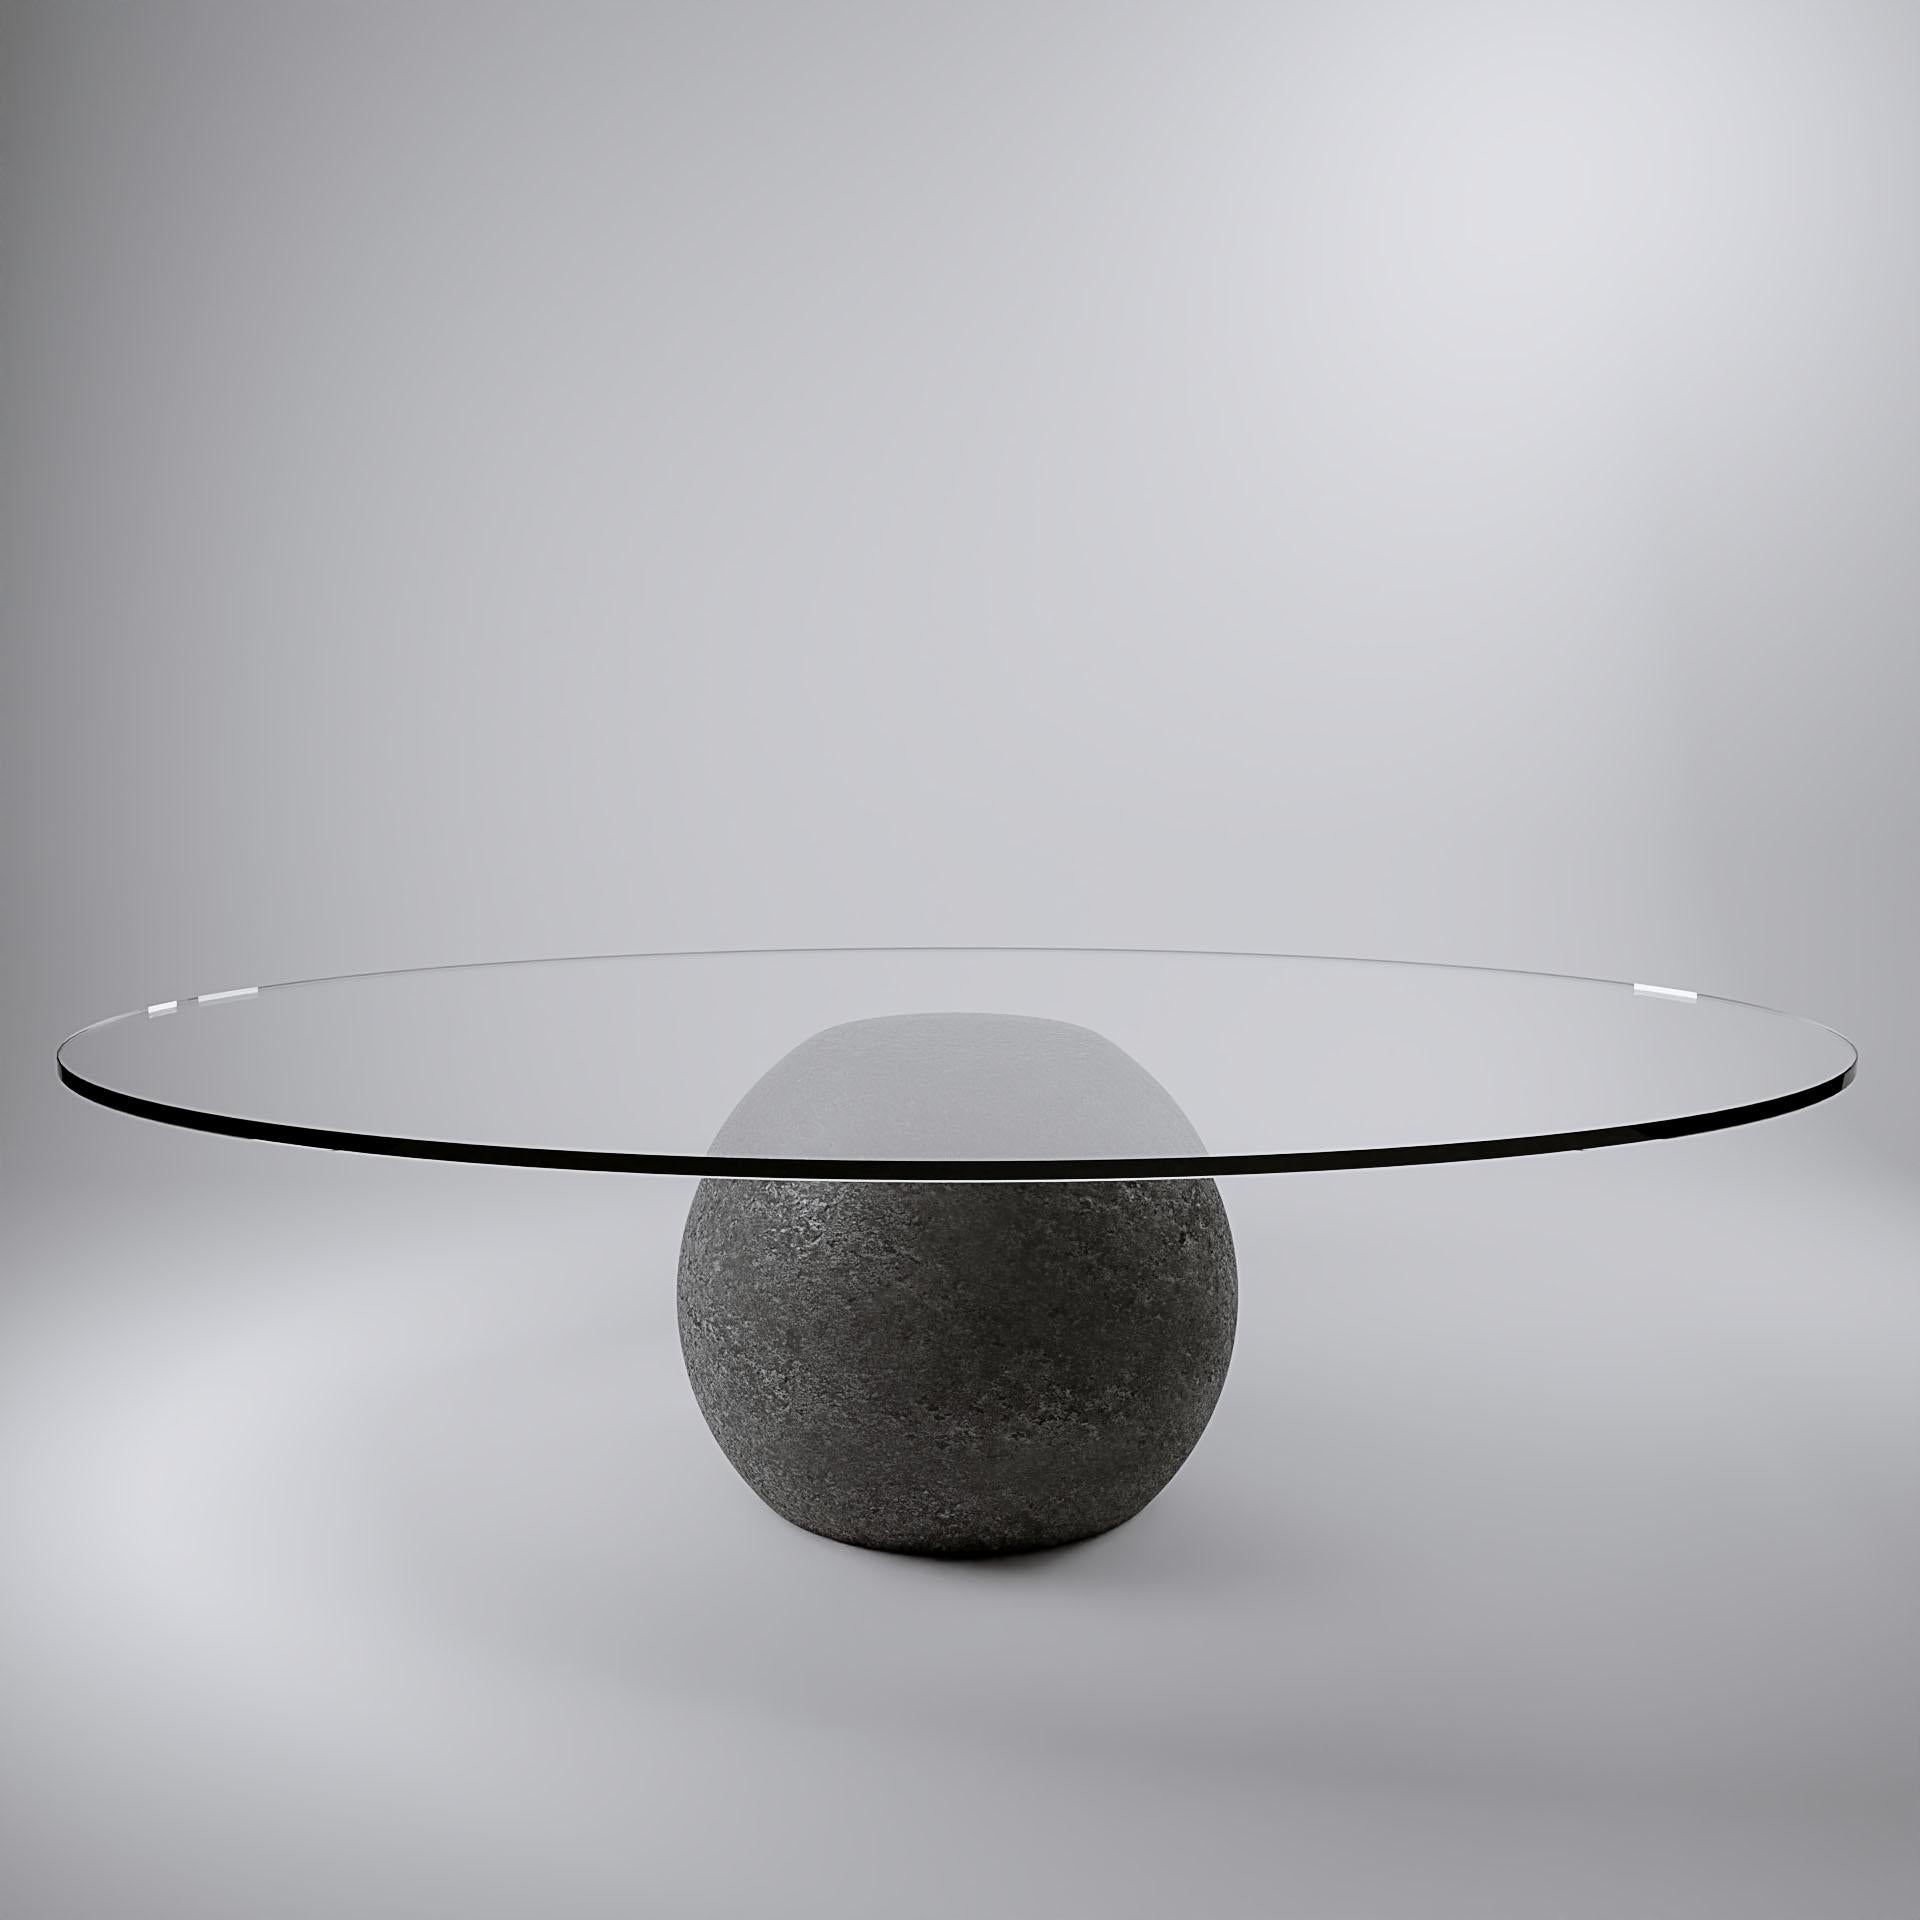 Mexican Volcanic stone and glass coffee table For Sale